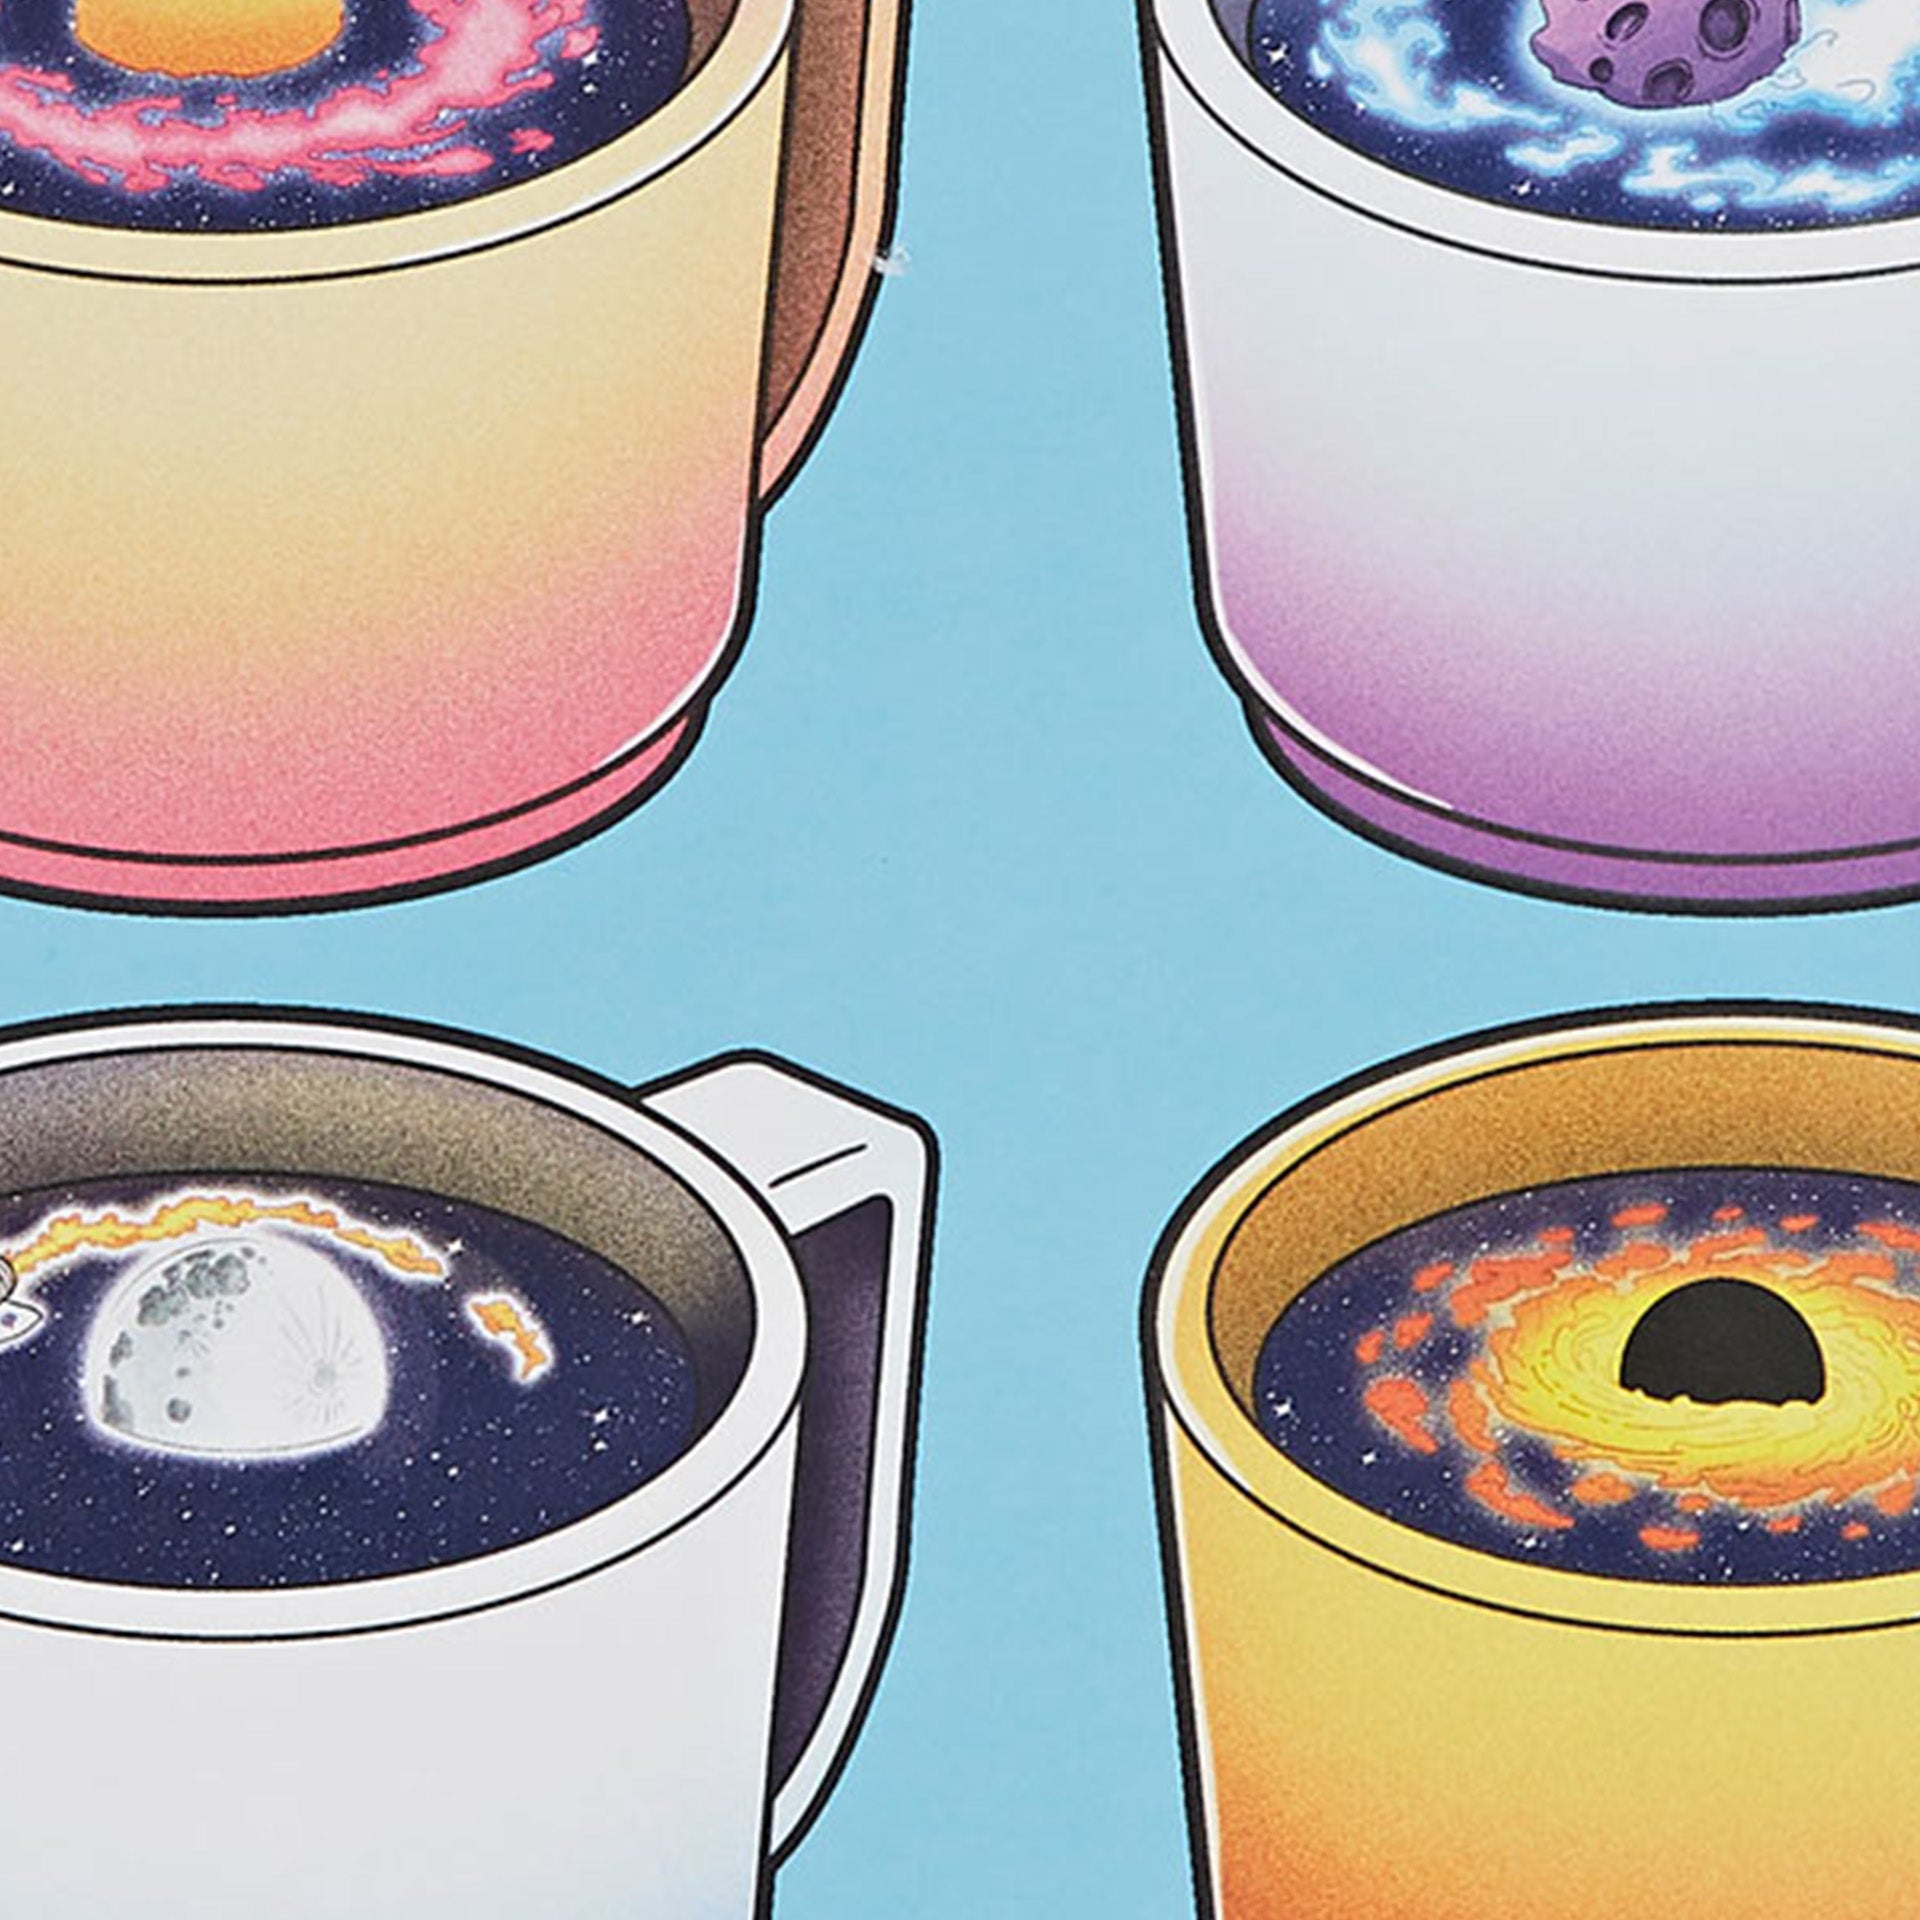 Closeup of coffee cups holding celestial objects